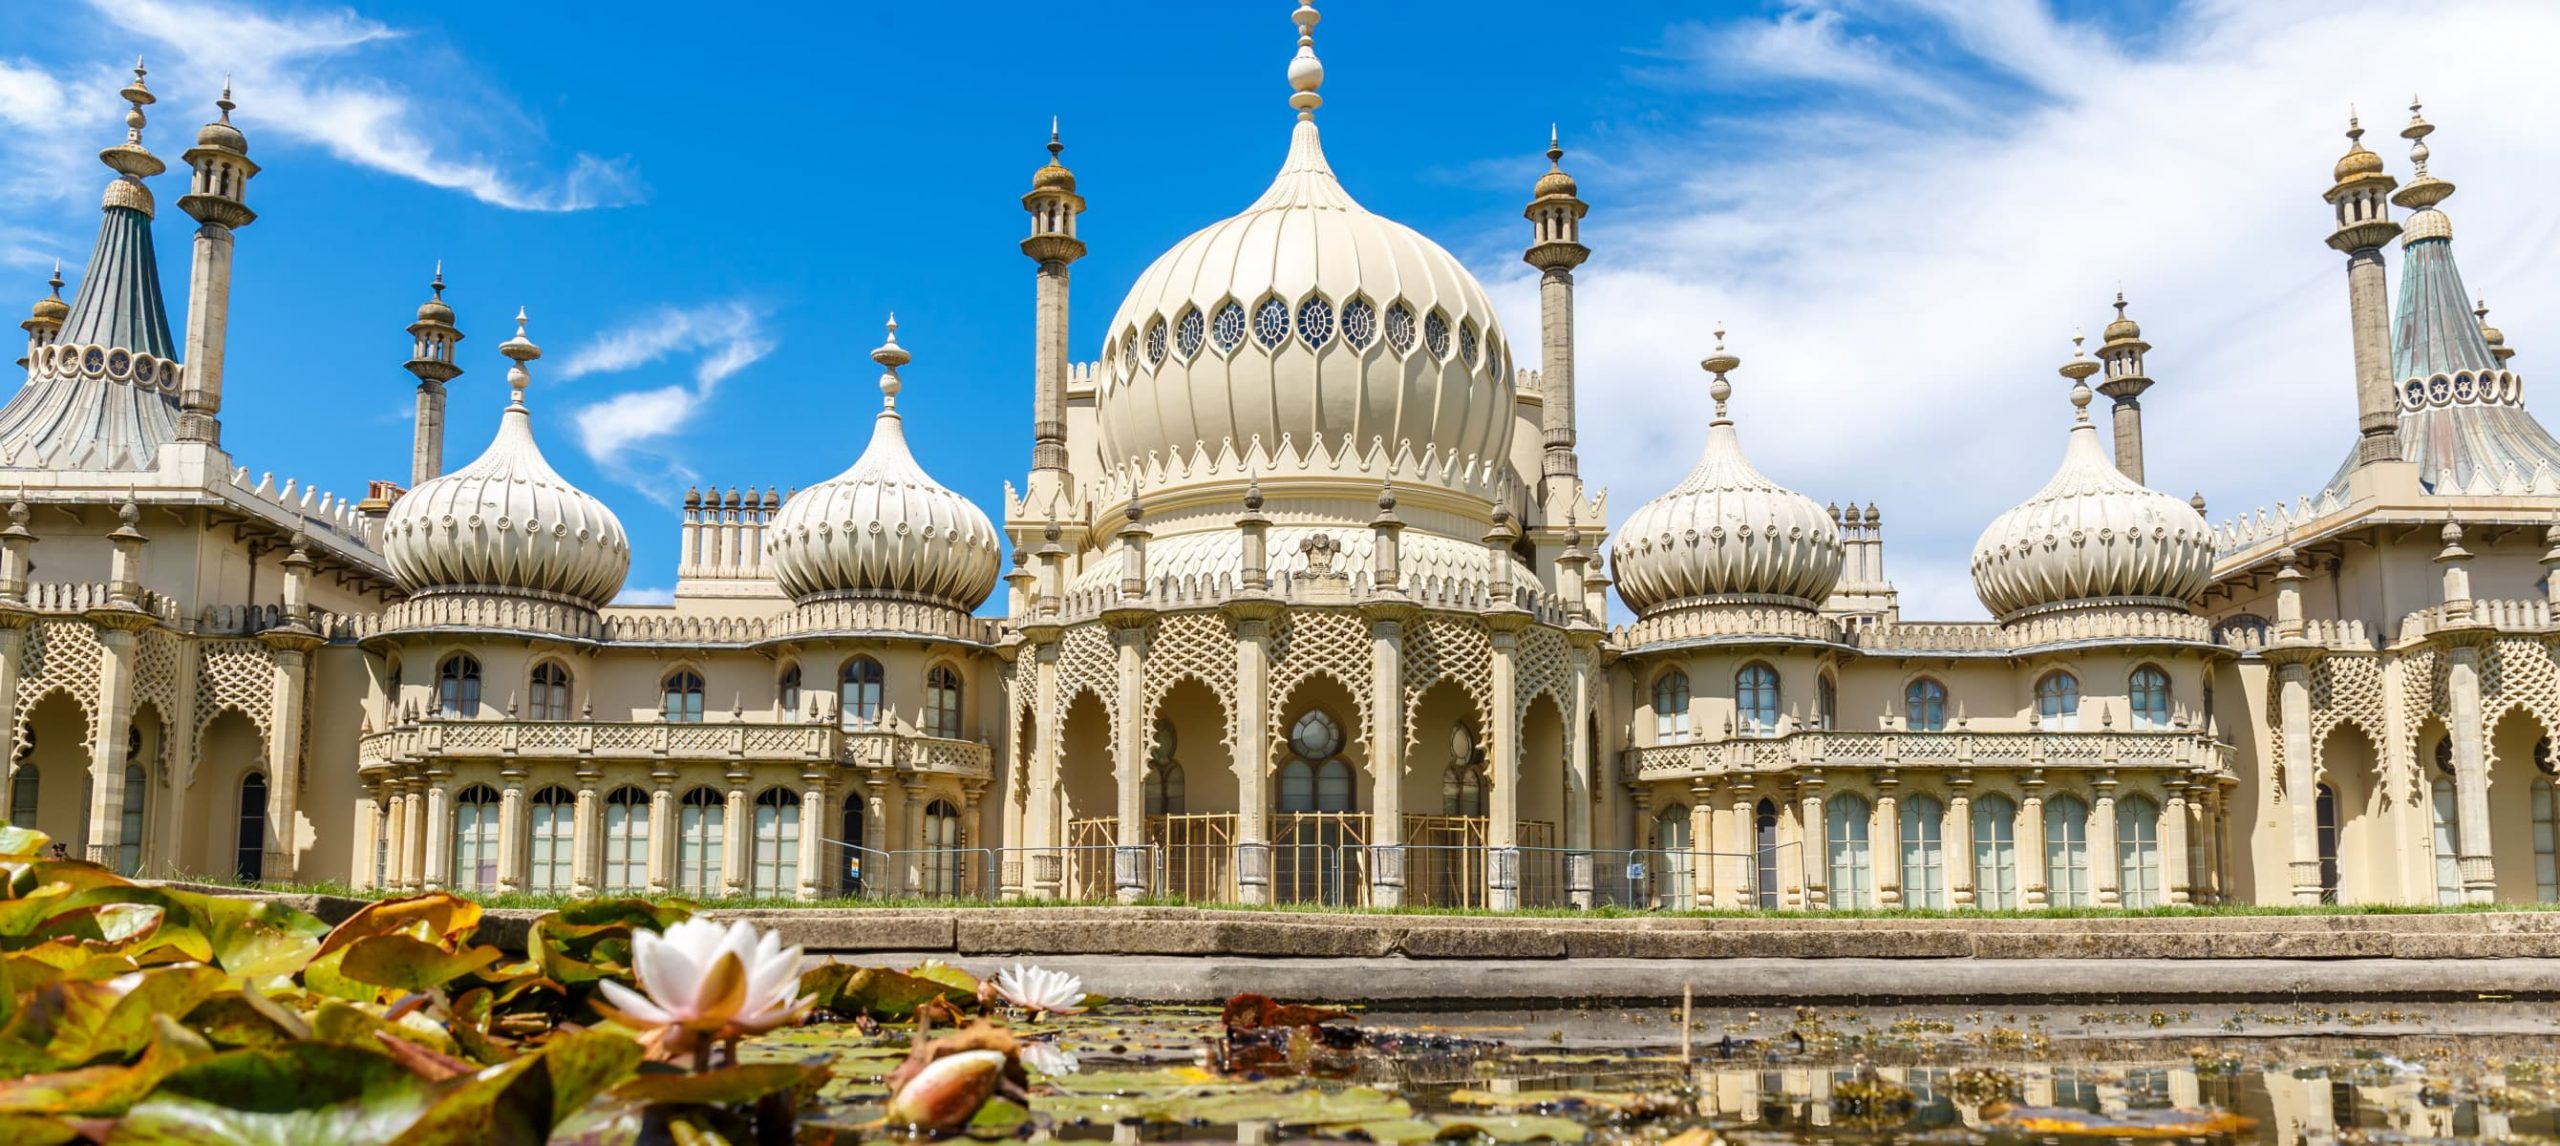 A Guide To Visiting The Royal Pavilion In Brighton